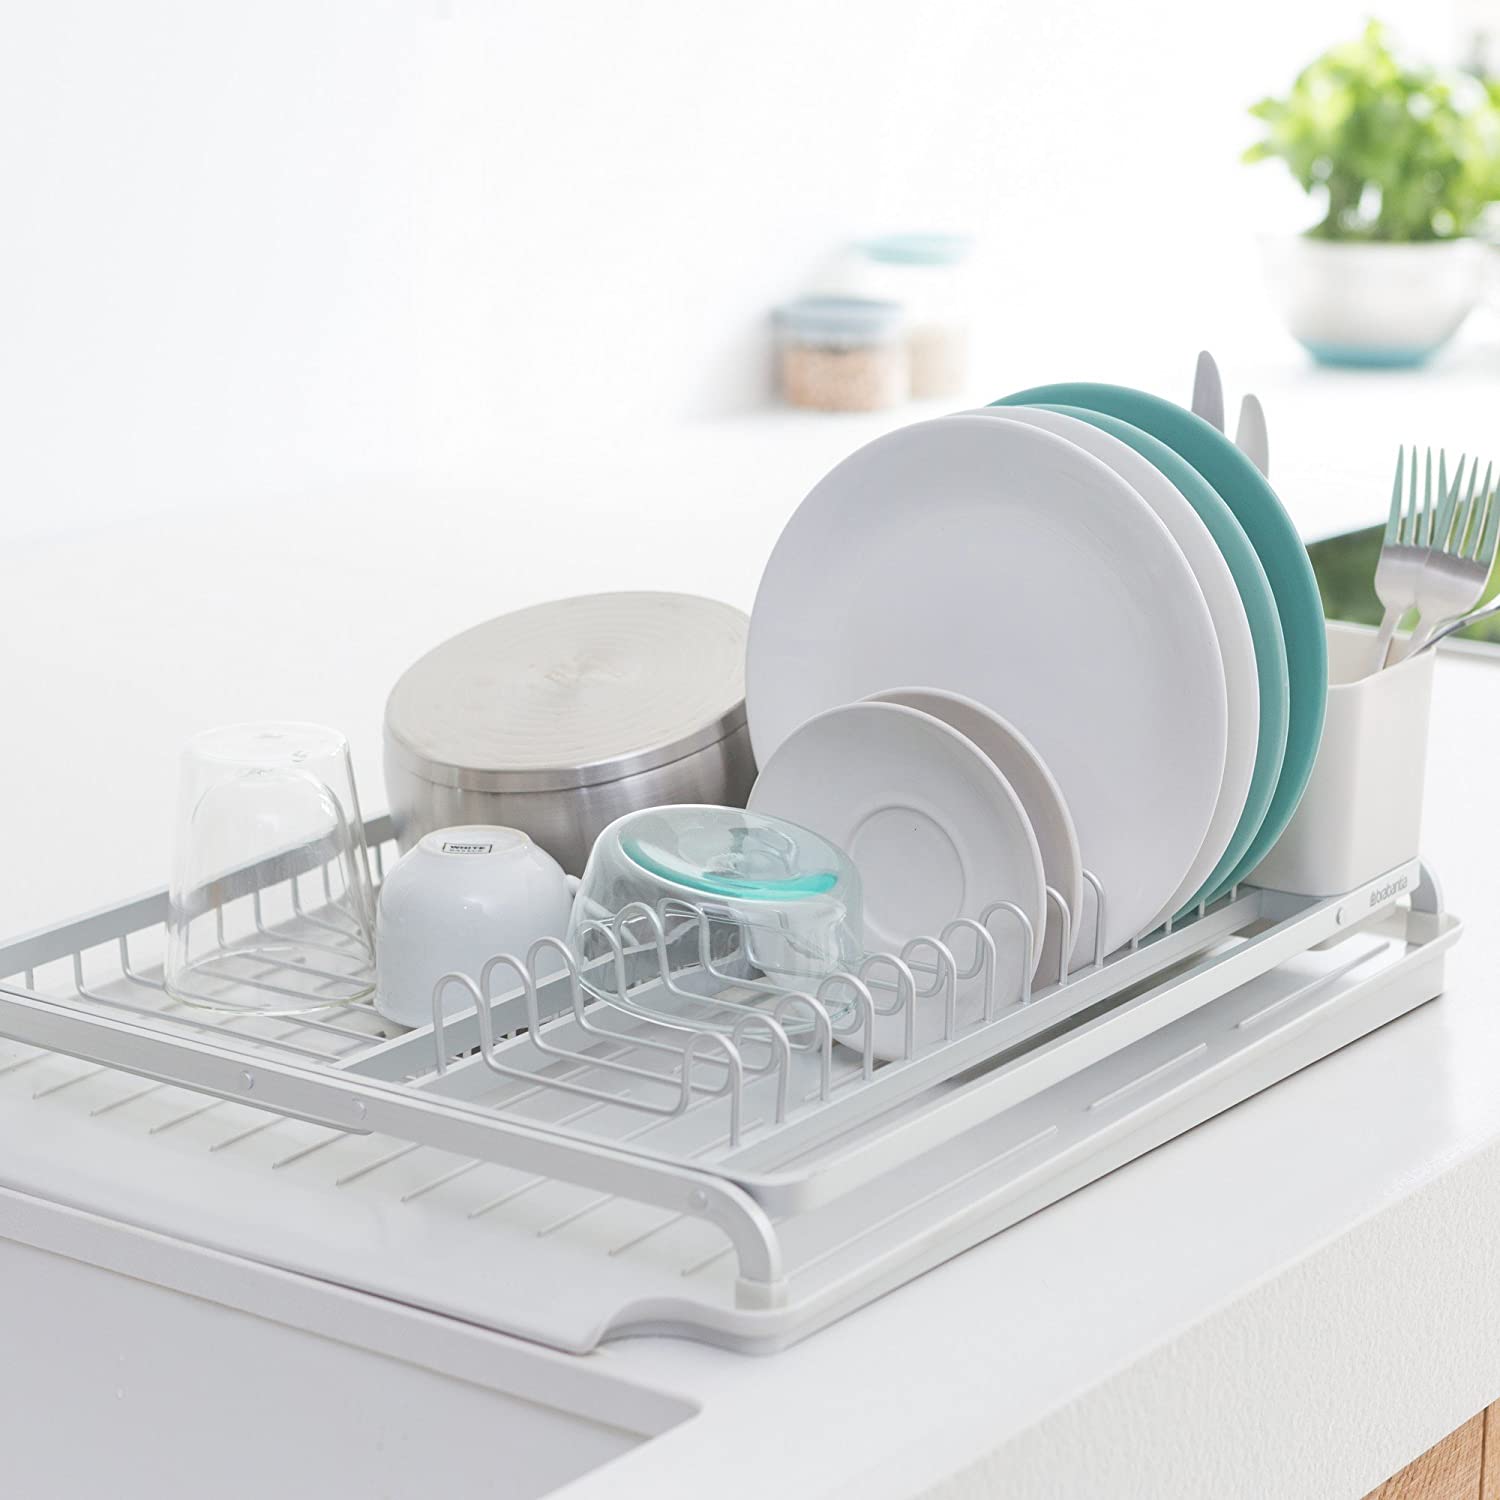 Plastic Forte Large Dish Drying Rack with Tray - Available in